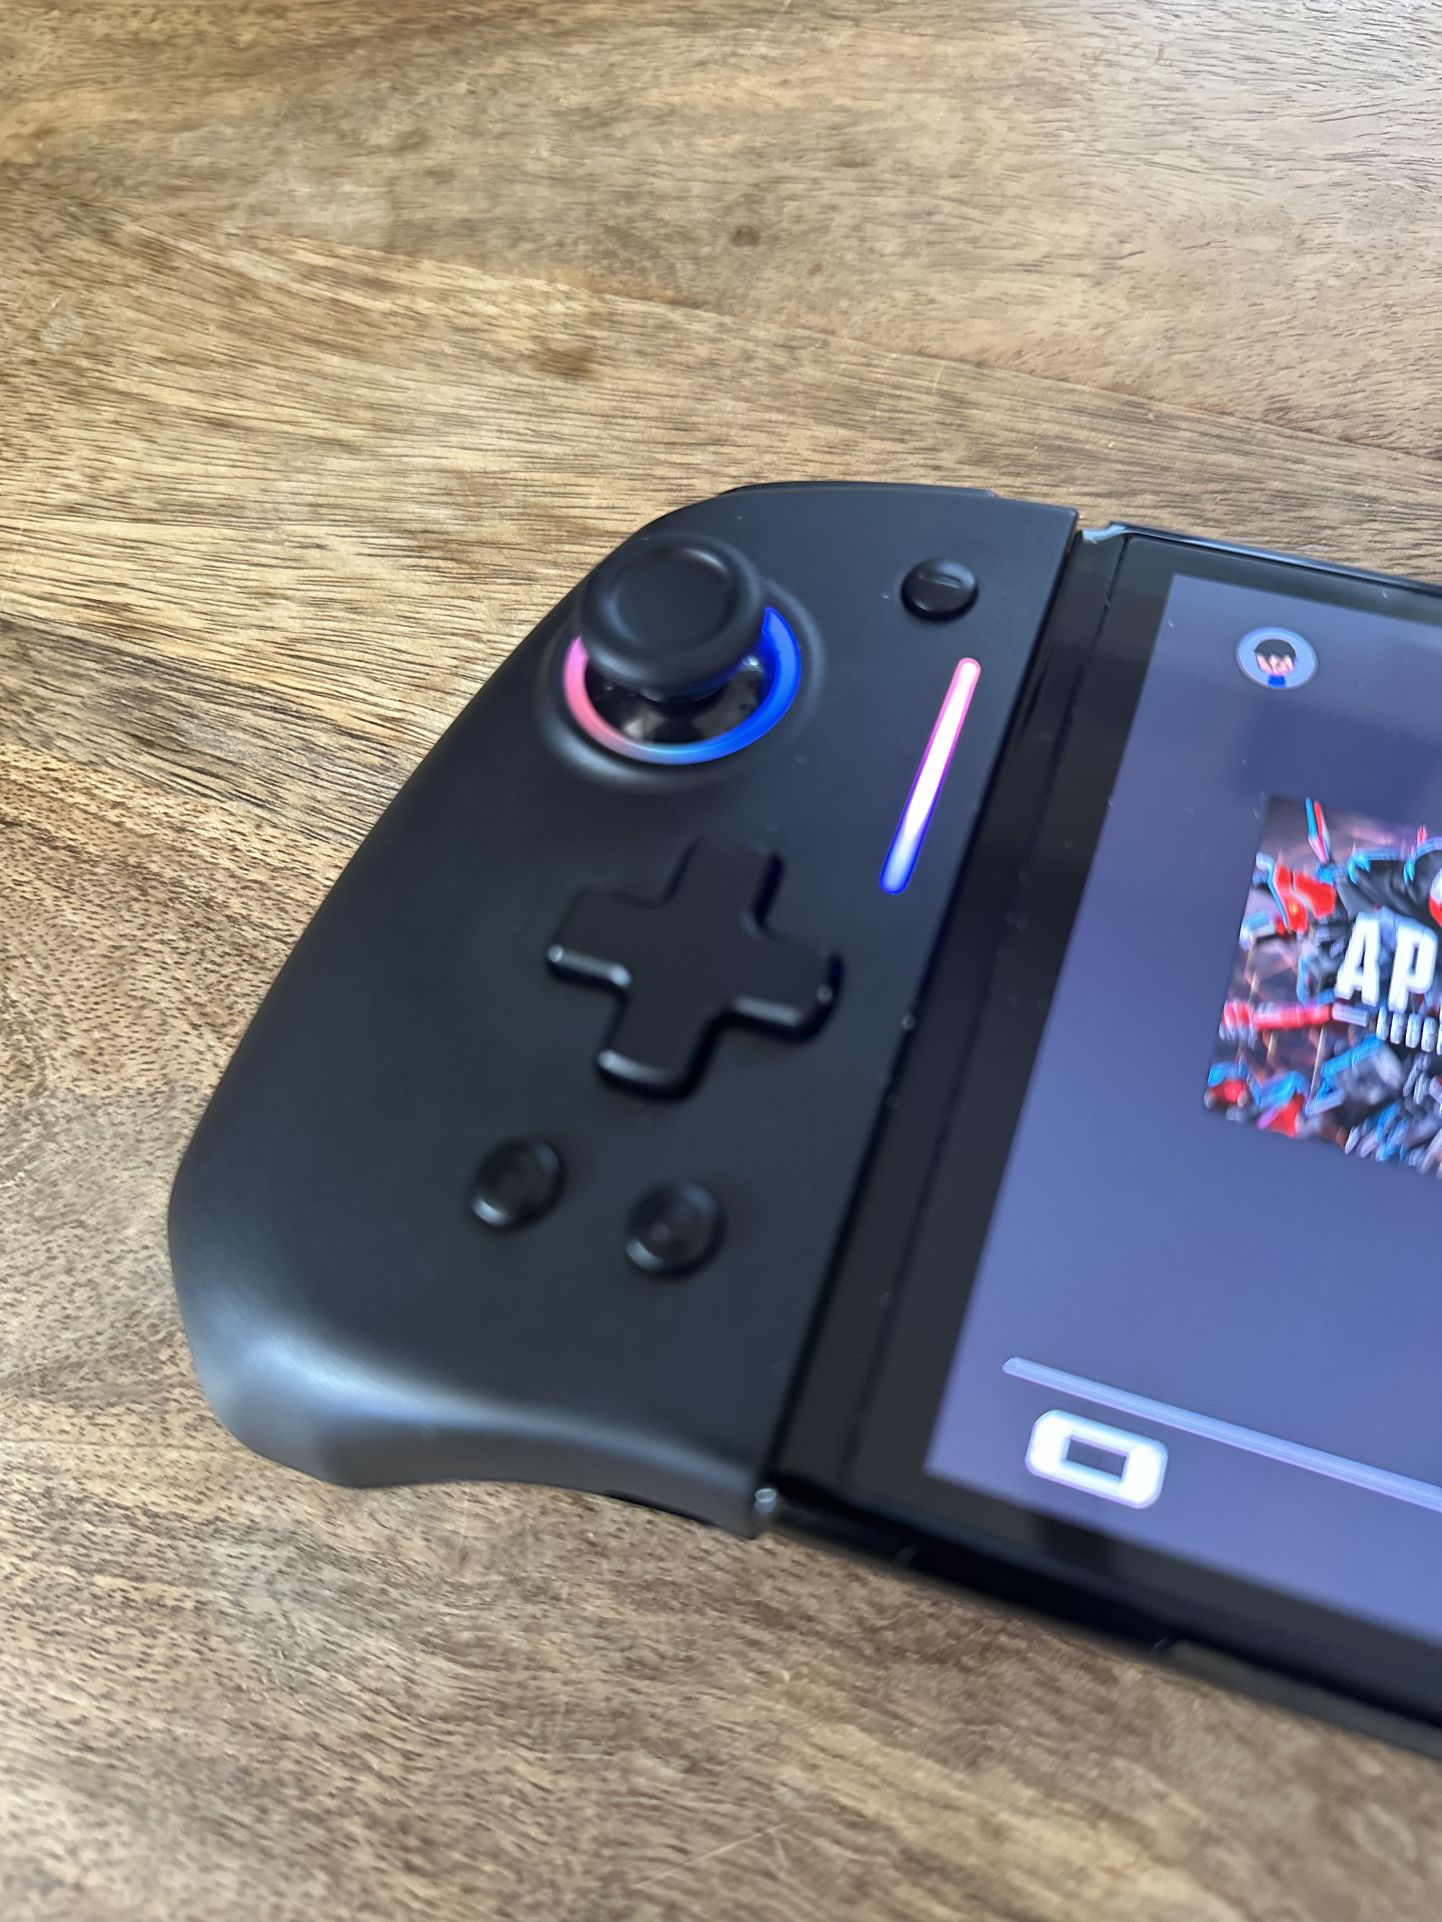 Has anyone used these Nyxi joycons on their Nintendo Switch? If so, how do  you like them? : r/Switch